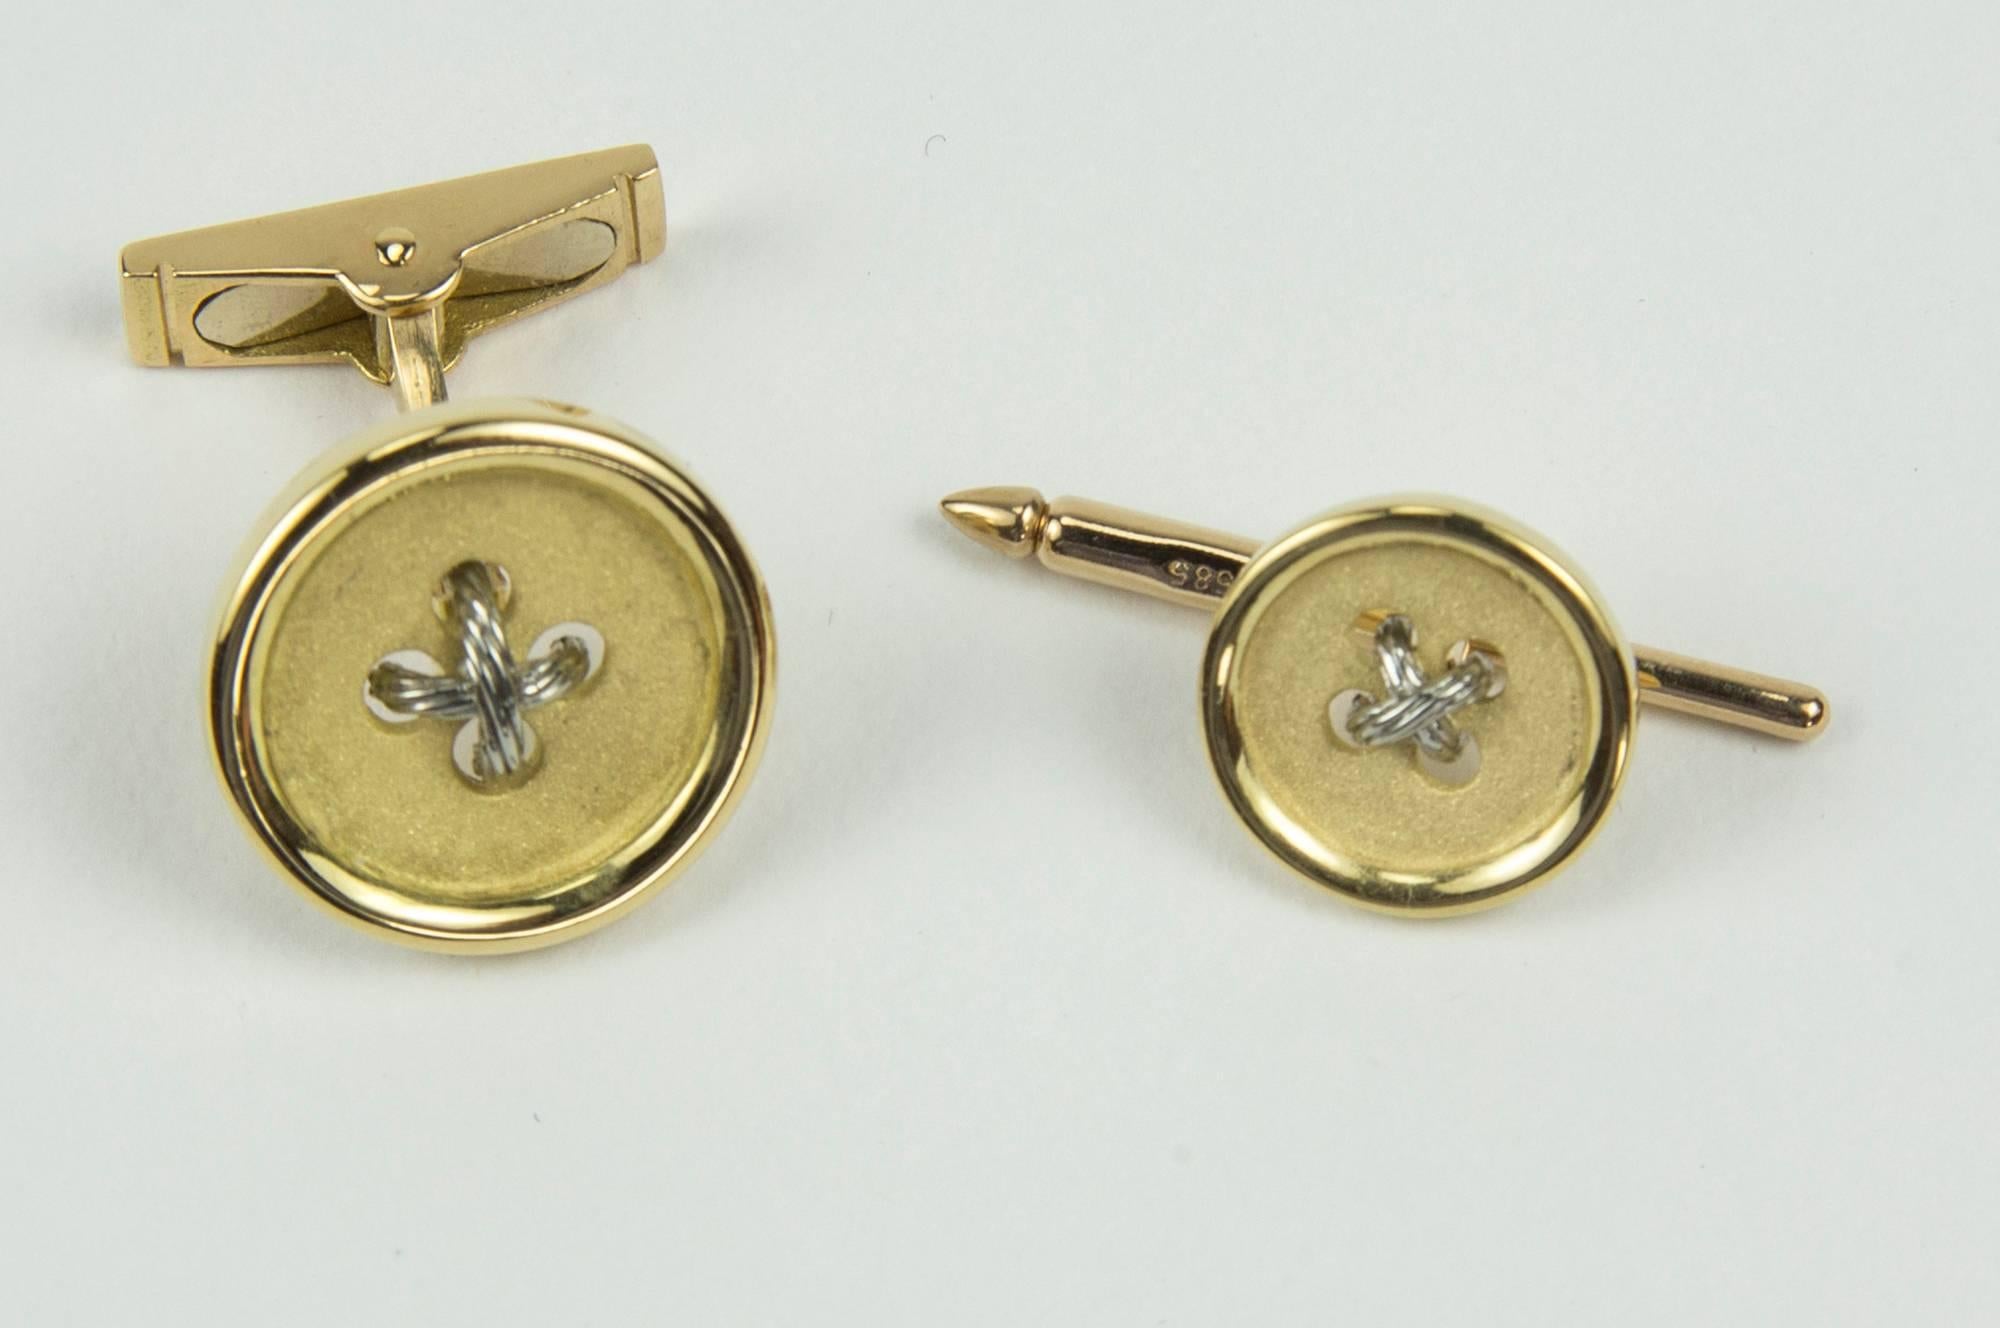 Classic Button Dress Set comprising a Pair of Cuff links and four matching Shirt Studs, highlighted with 14k white gold crisscross thread details, Hand crafted in solid 14k yellow gold. For that Special Man in your life, including You!